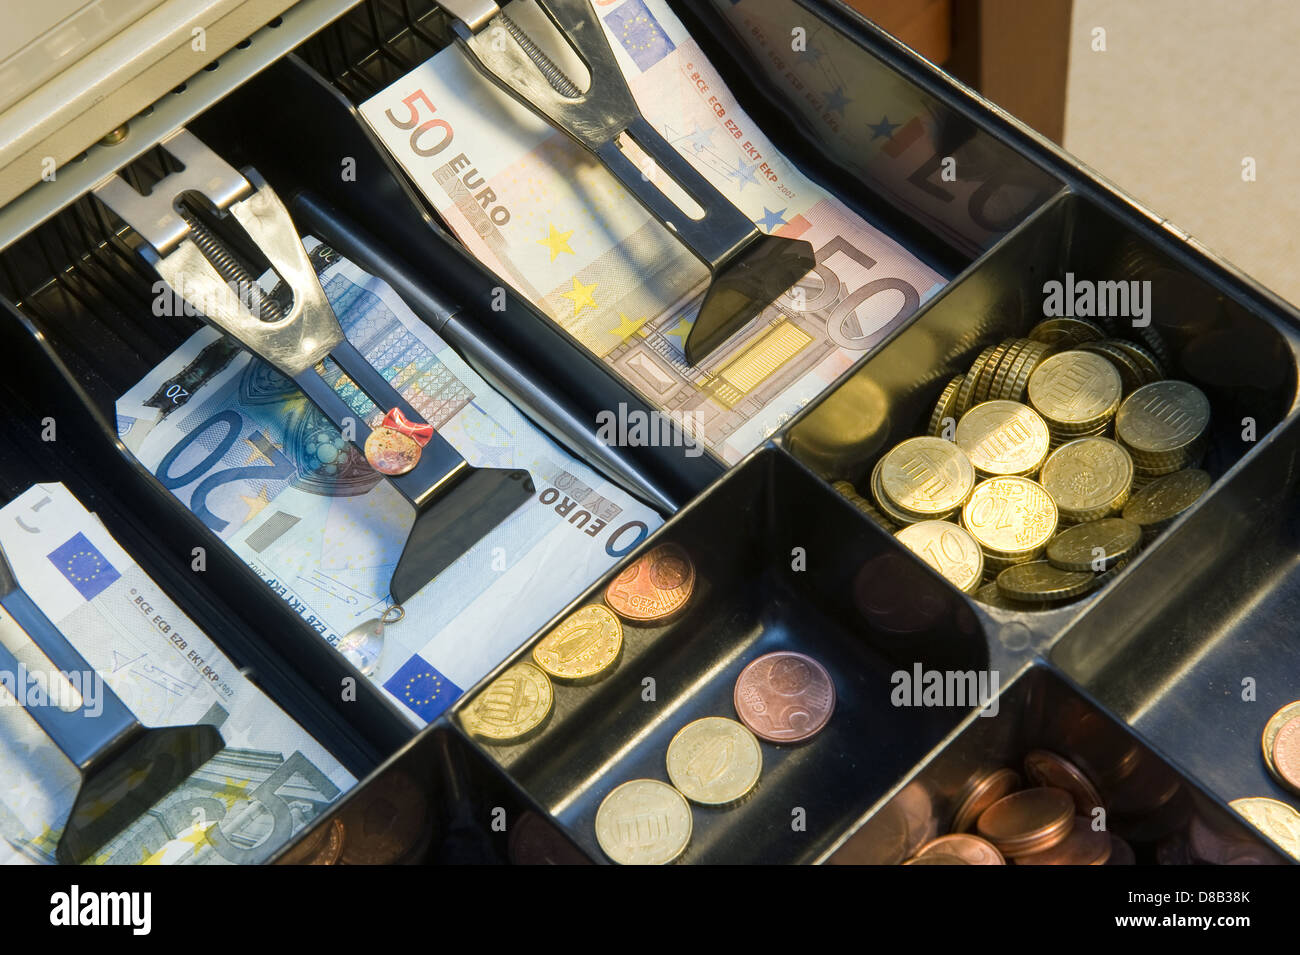 Cash money in drawer at a paydesk in a store Stock Photo